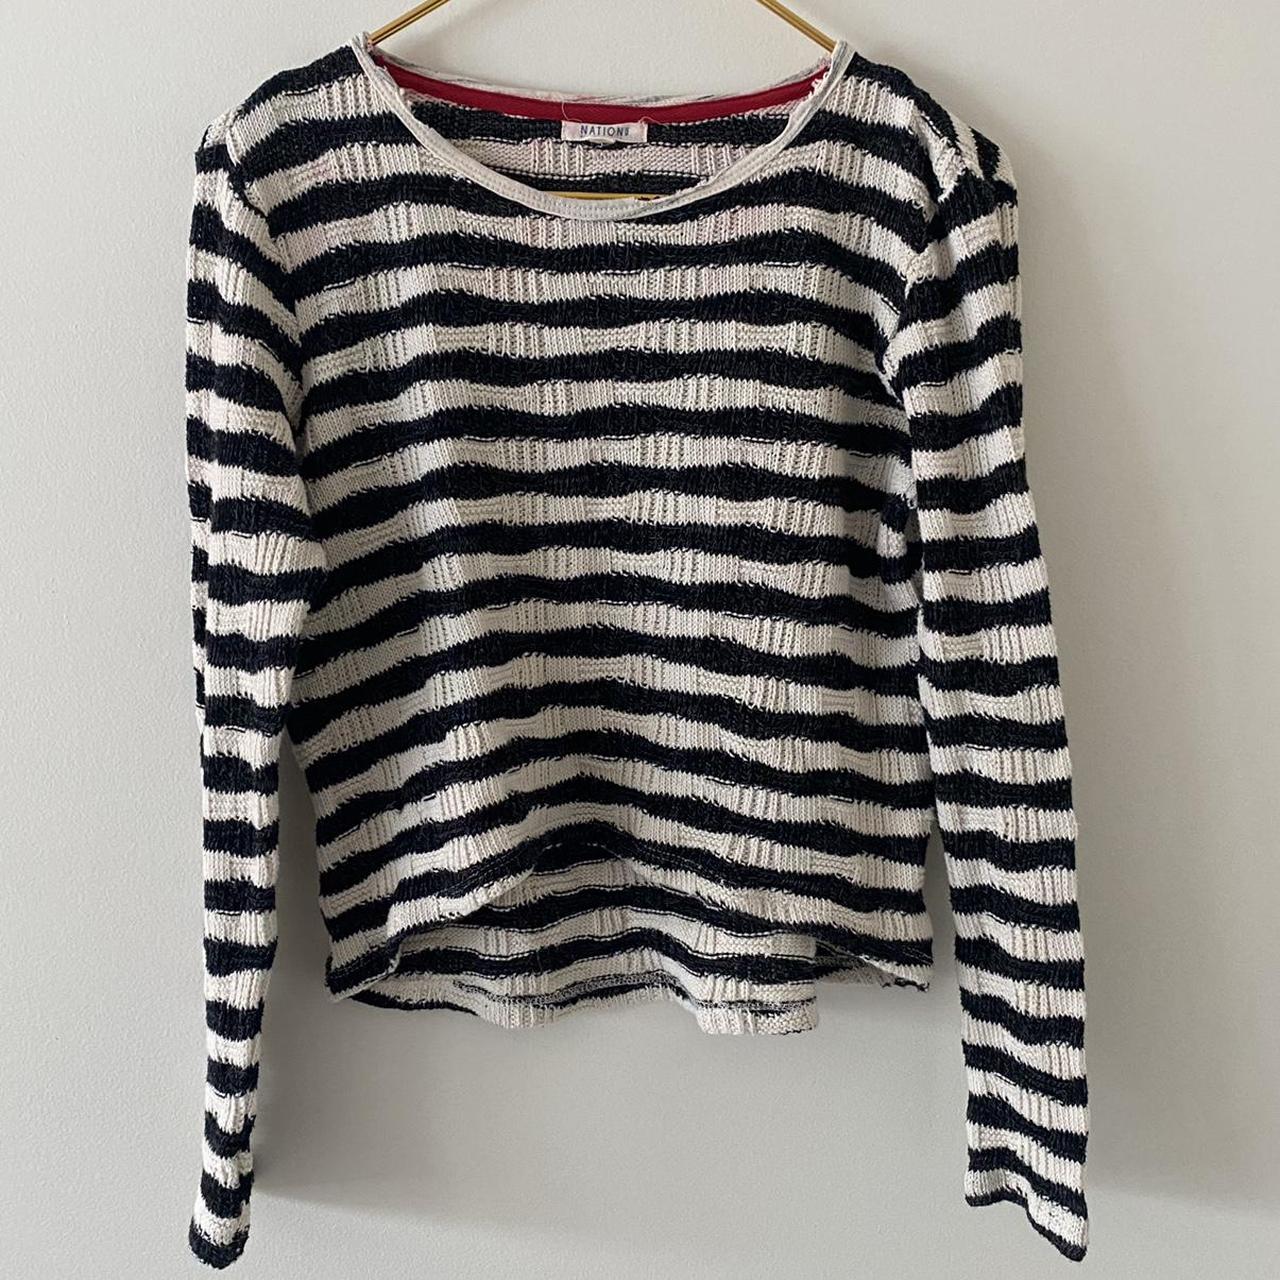 Navy/black + white striped sweater🤍 Size small Pink... - Depop